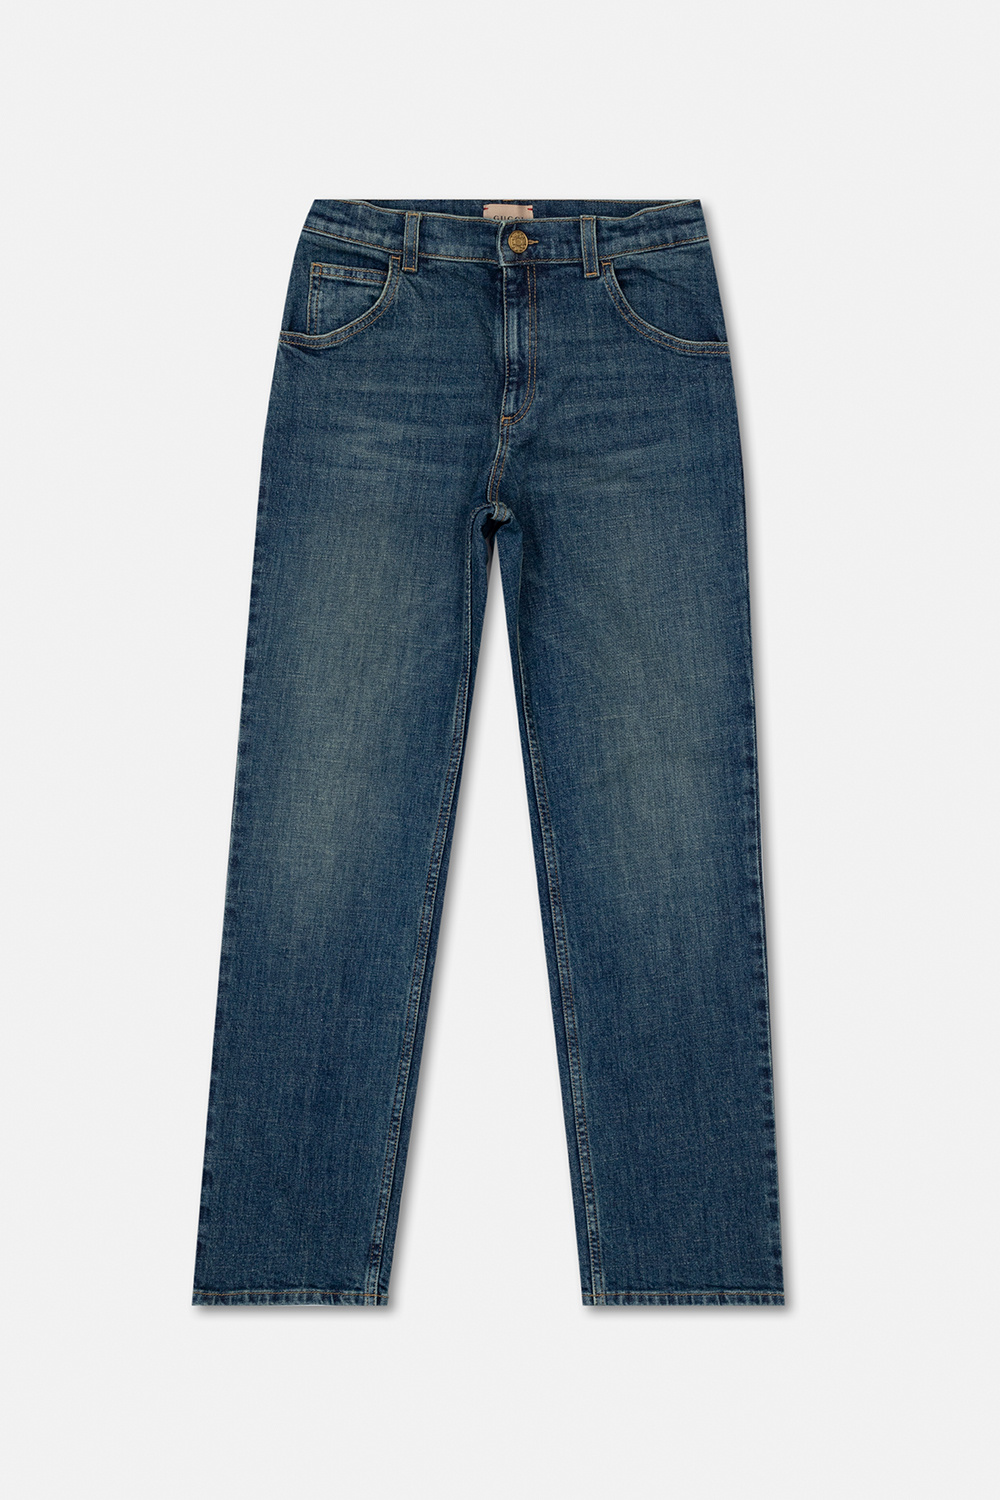 gucci with Kids Horsebit jeans